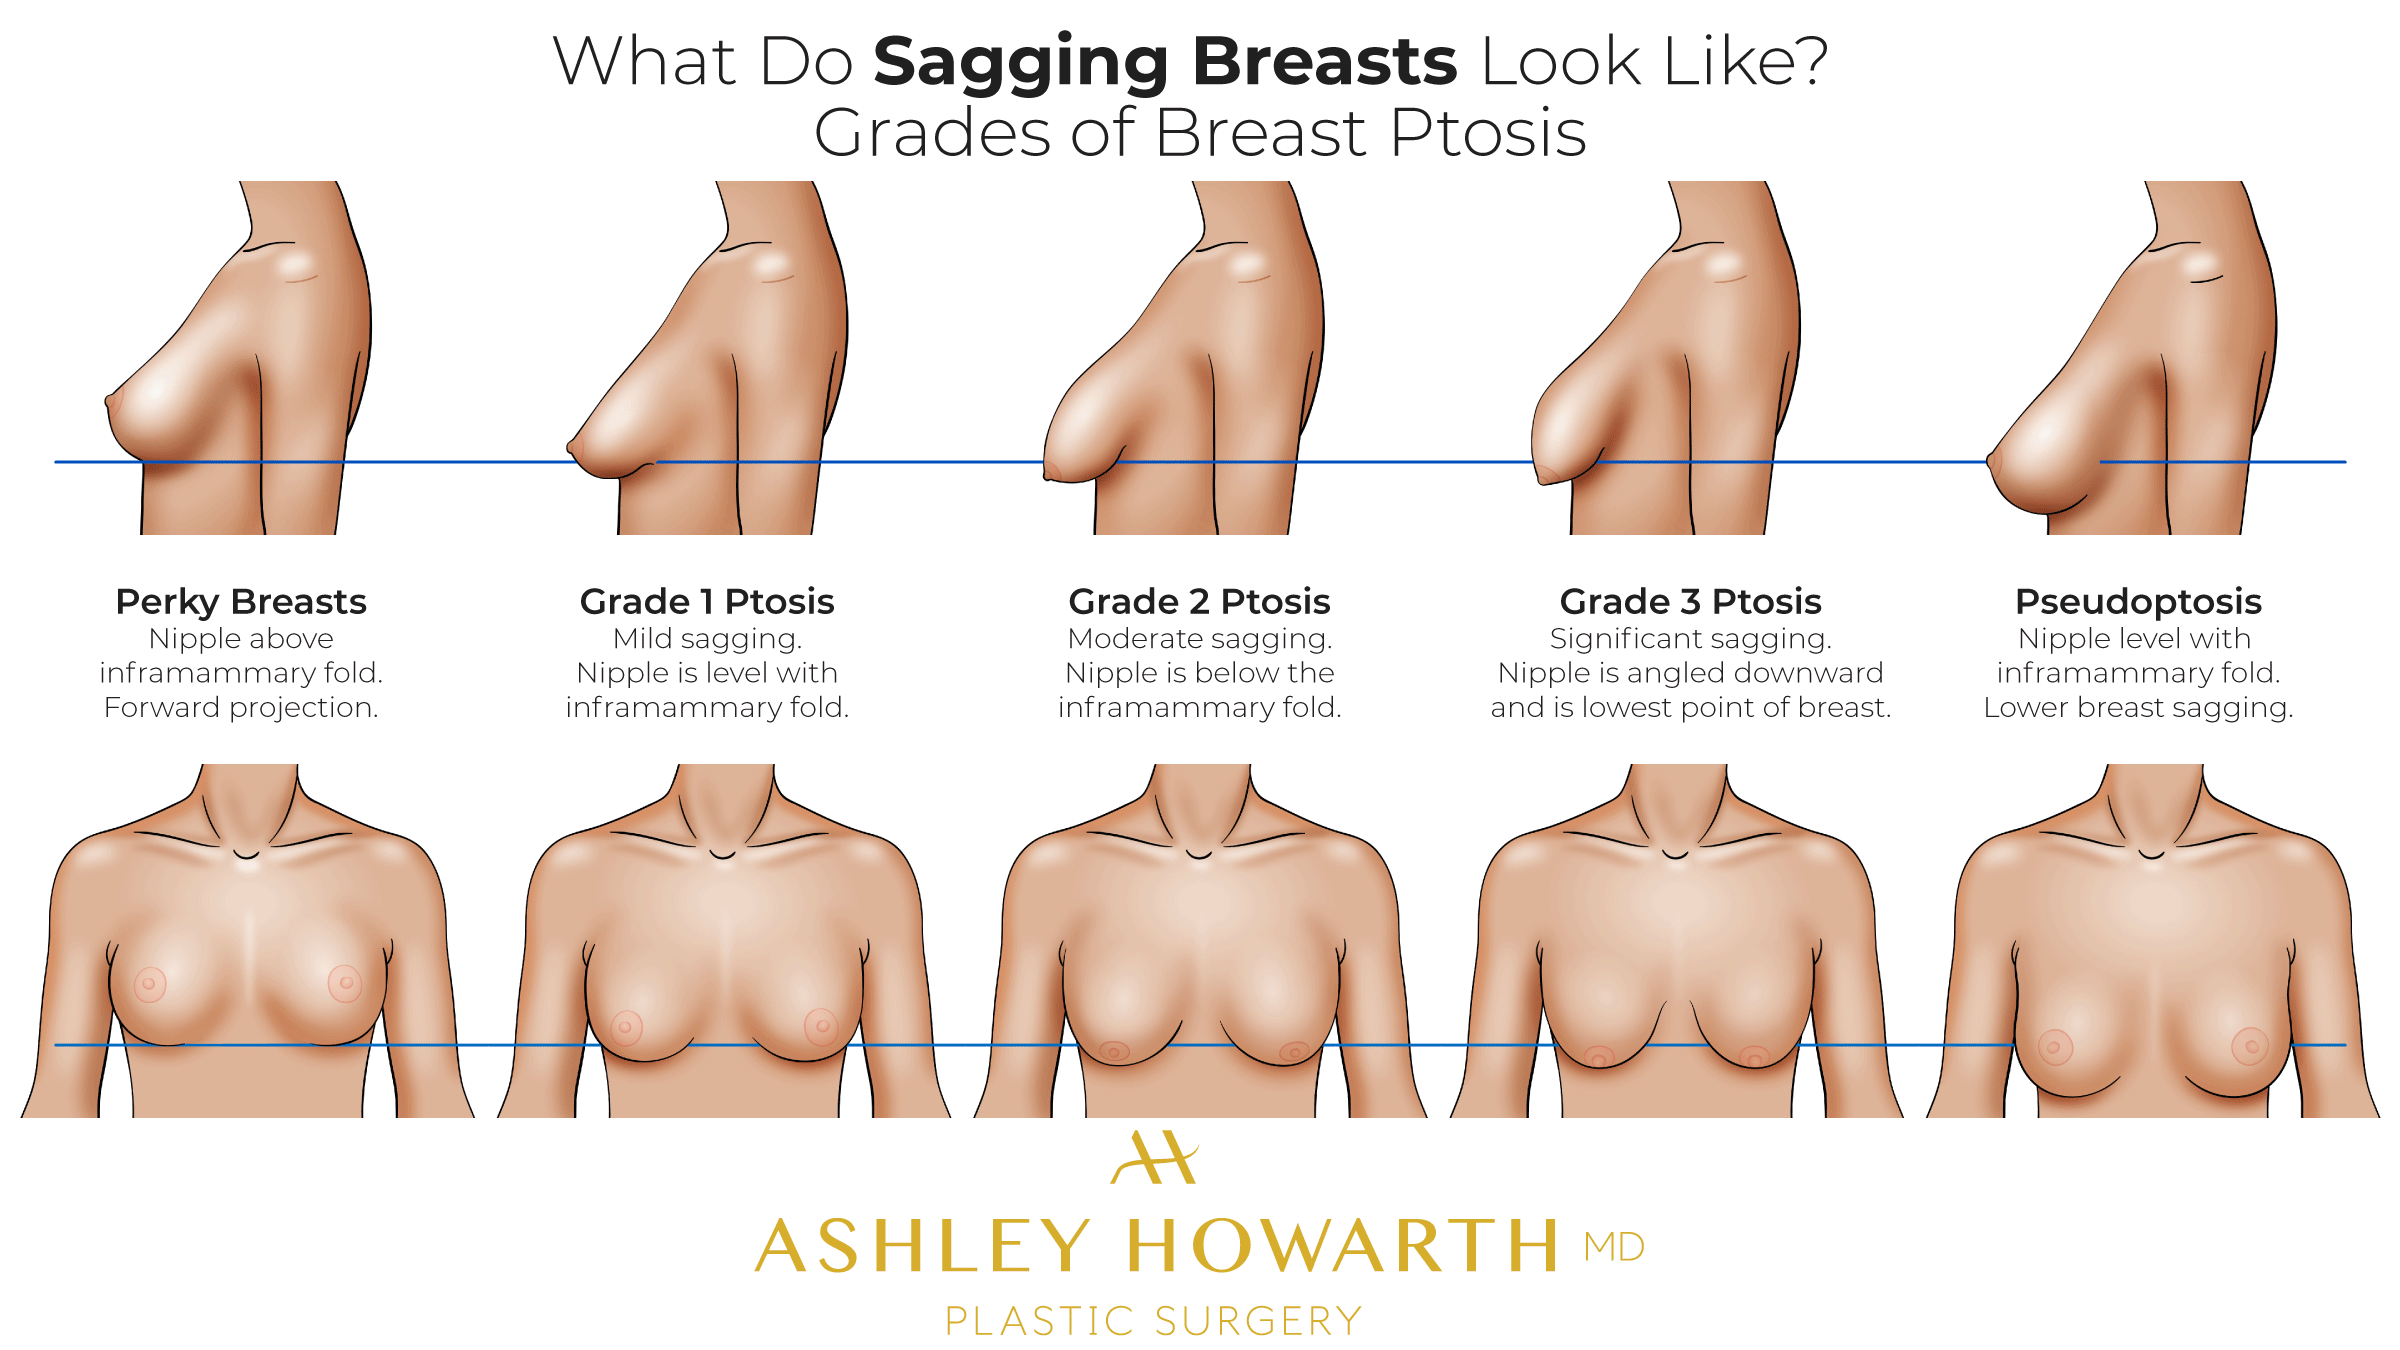 carol buege recommends Pictures Of Saggy Breast